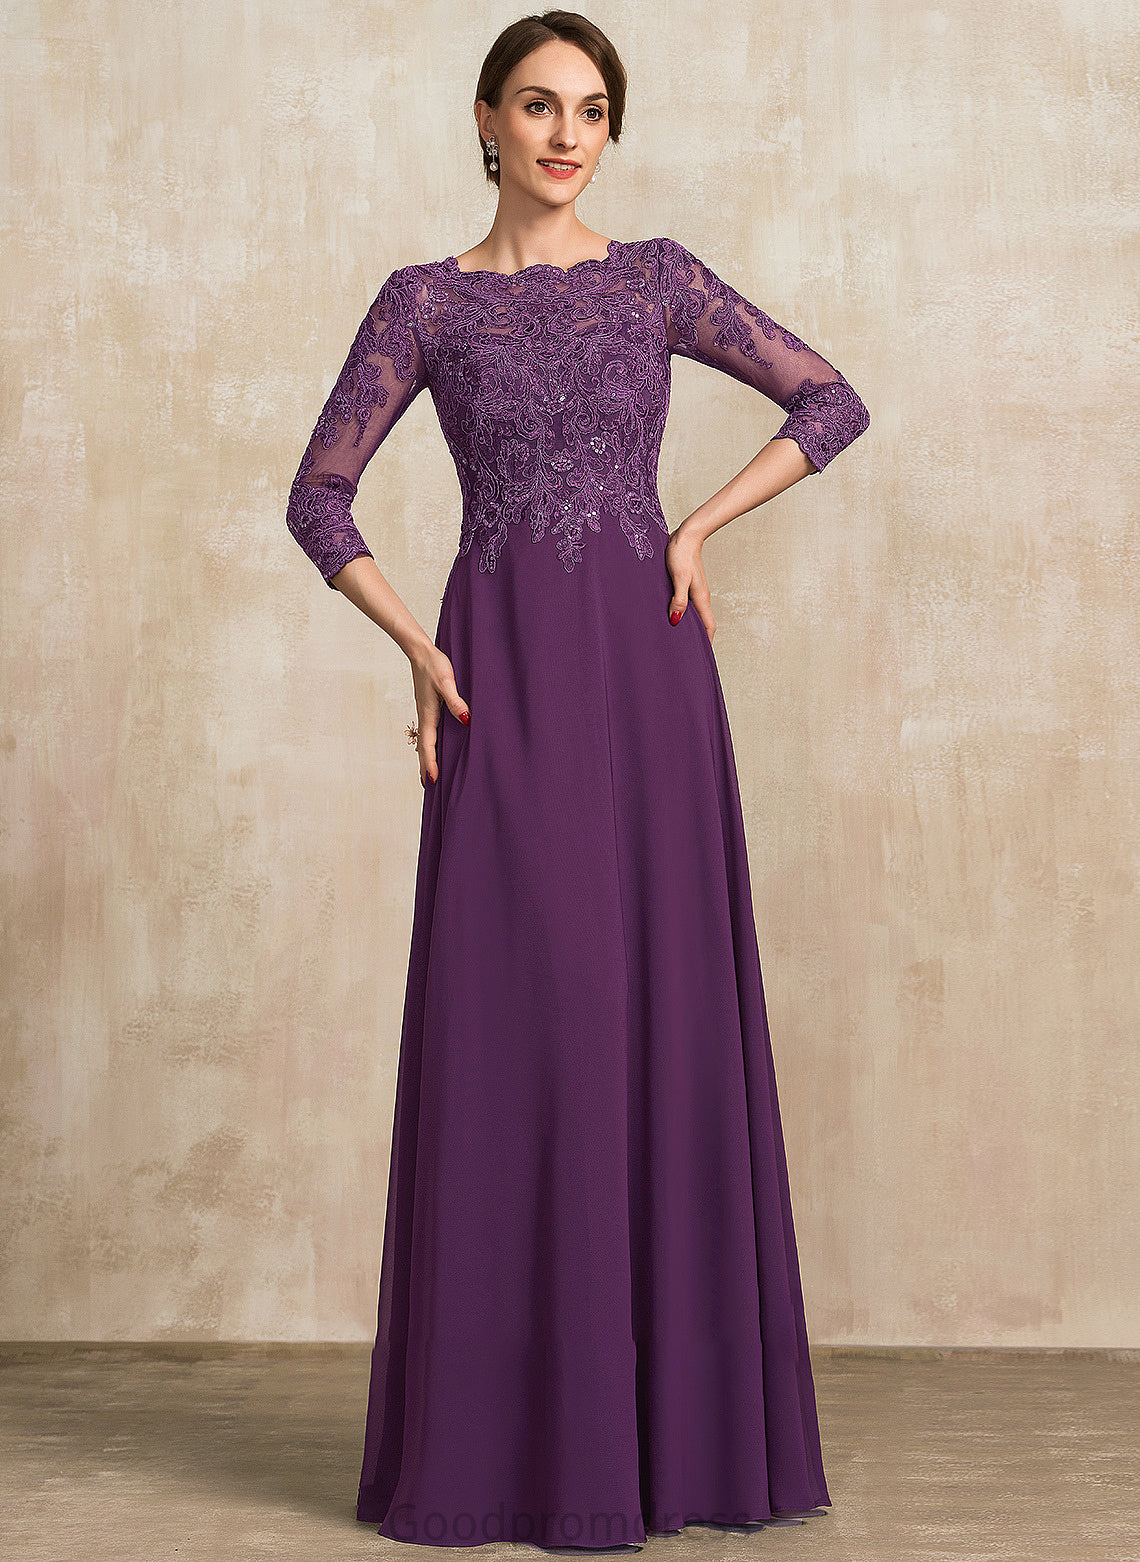 Bride Chiffon Sequins A-Line Mother of the Bride Dresses Lace Julianna With Mother Scoop the Floor-Length Dress of Neck